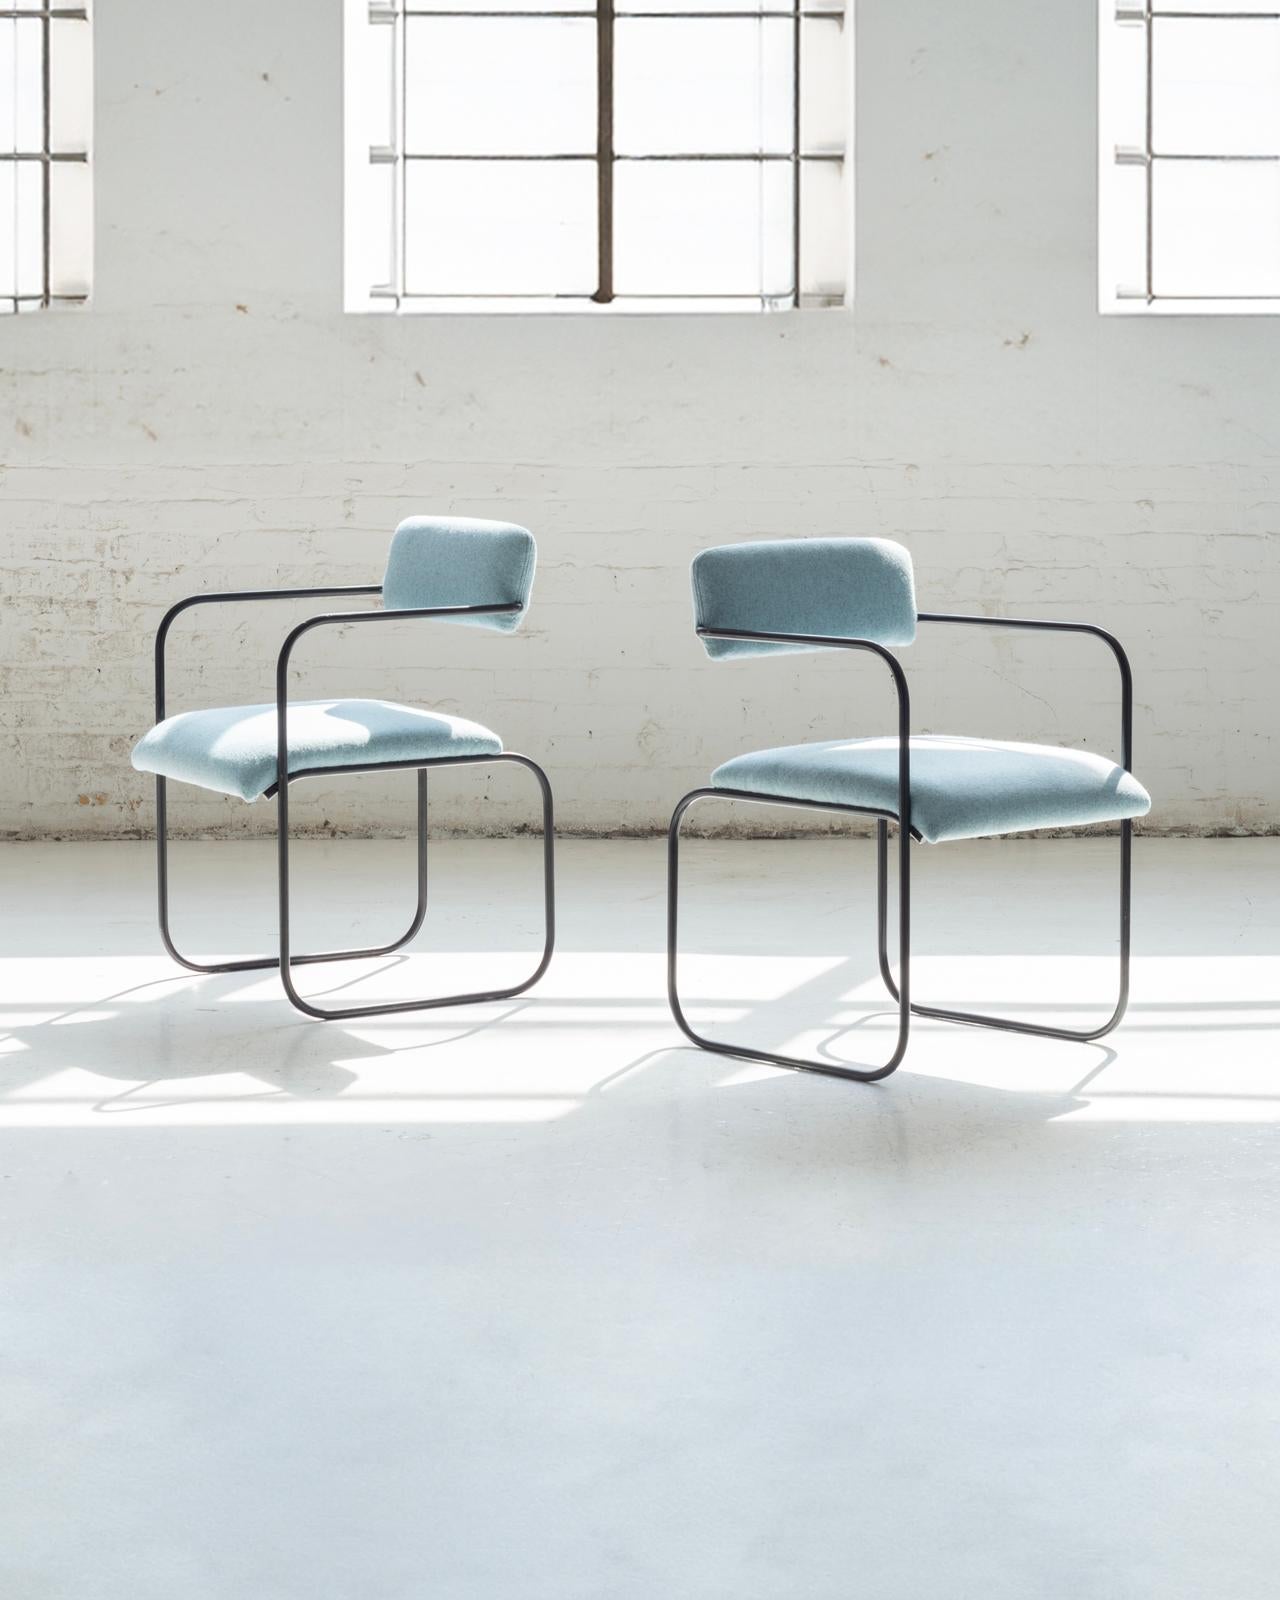 Powder-Coated Set of 6 Chairs Designed by George Veronda